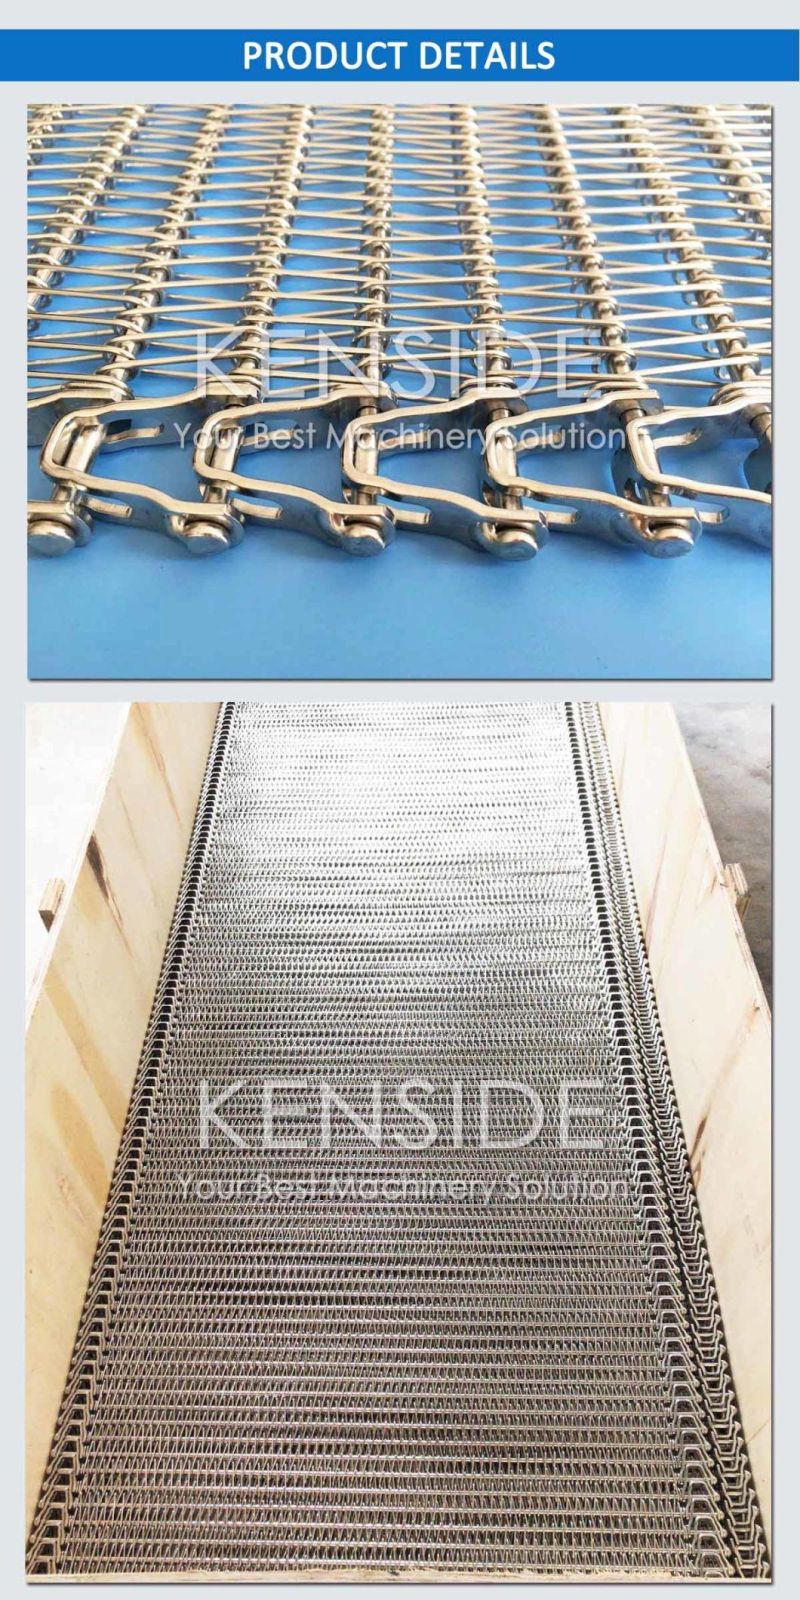 Stainless Steel Belting Spiral Conveyor Belts Reduced Radius Belts for Low Tension Spiral Systems